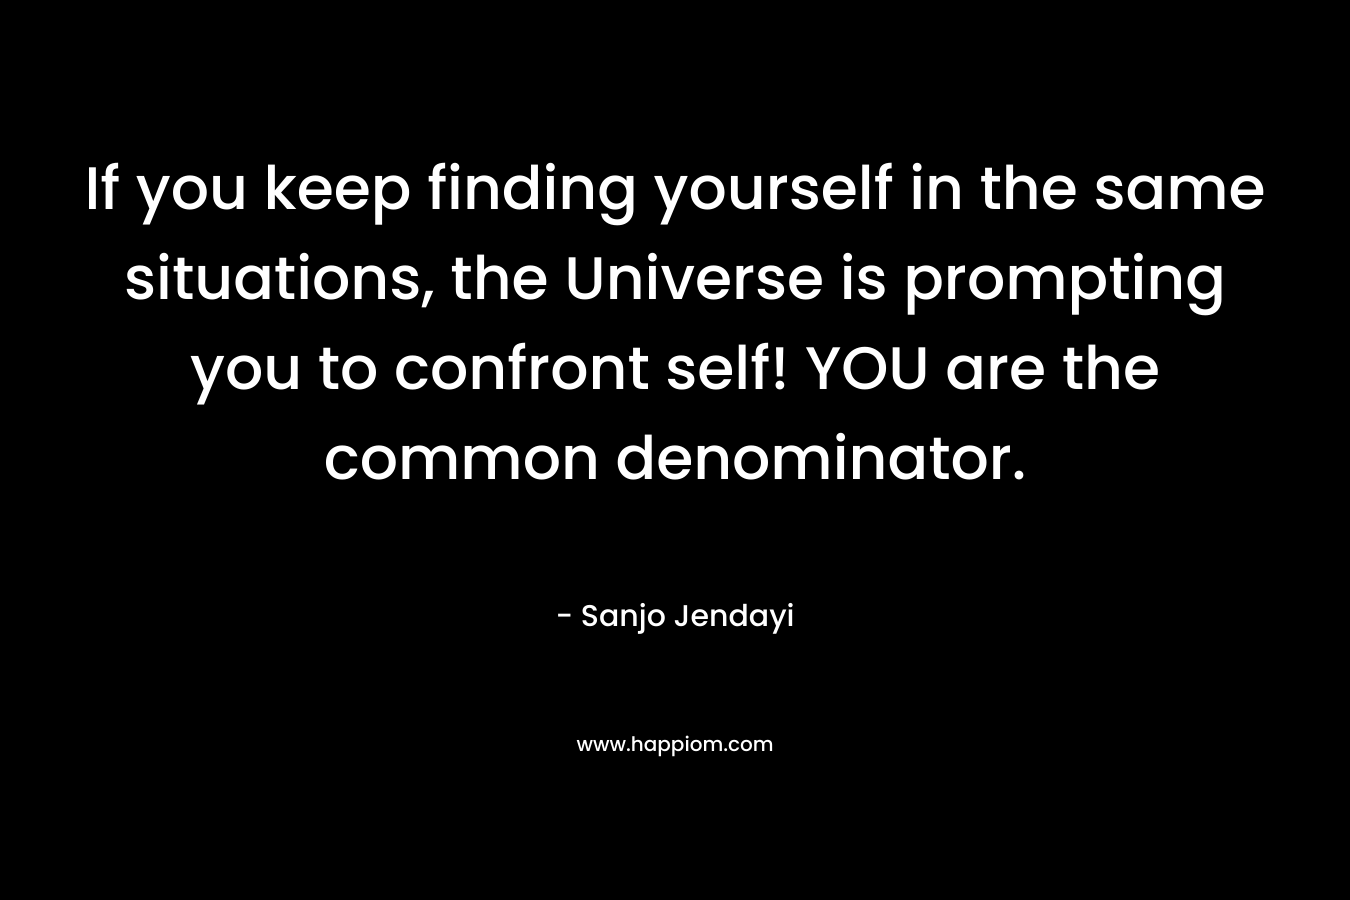 If you keep finding yourself in the same situations, the Universe is prompting you to confront self! YOU are the common denominator.